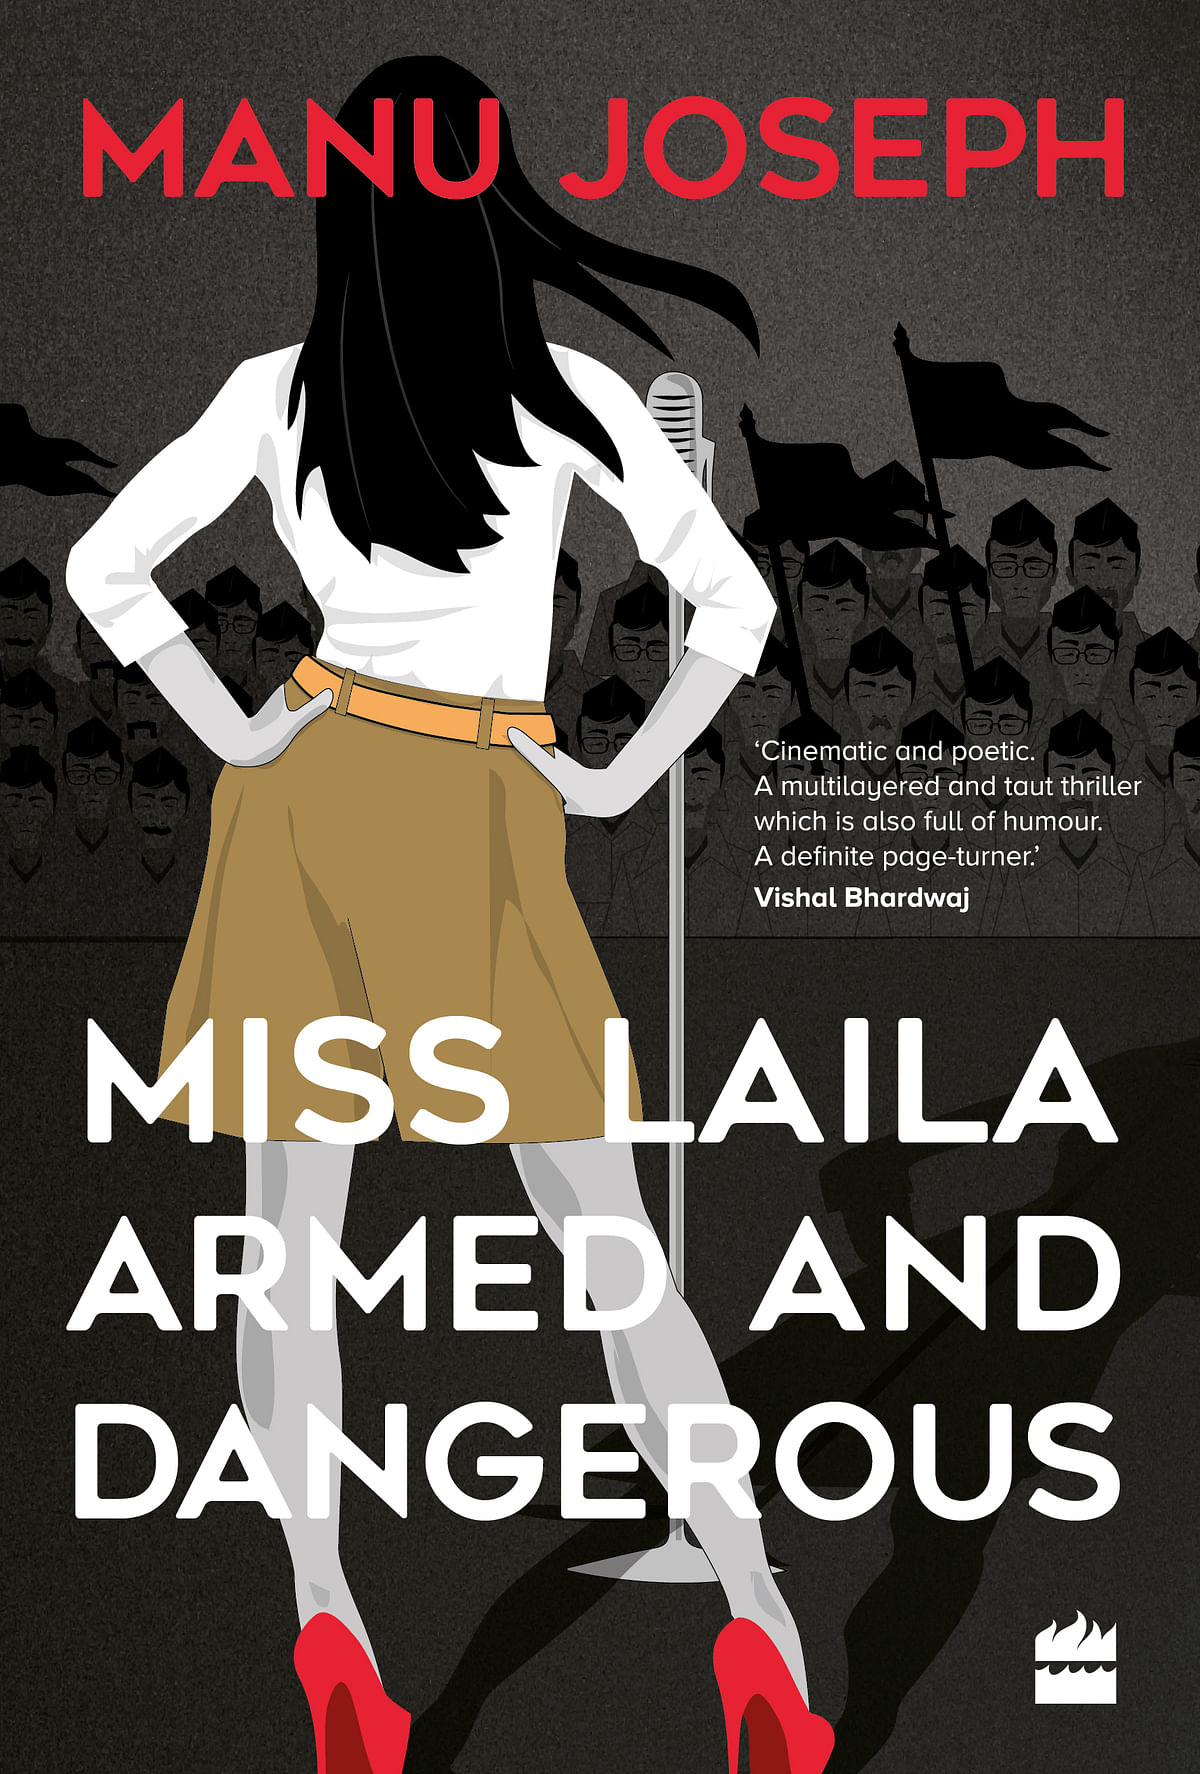 

‘Miss Laila, Armed and Dangerous’ is a book to slowly savour and turn in your mind long after it’s over.